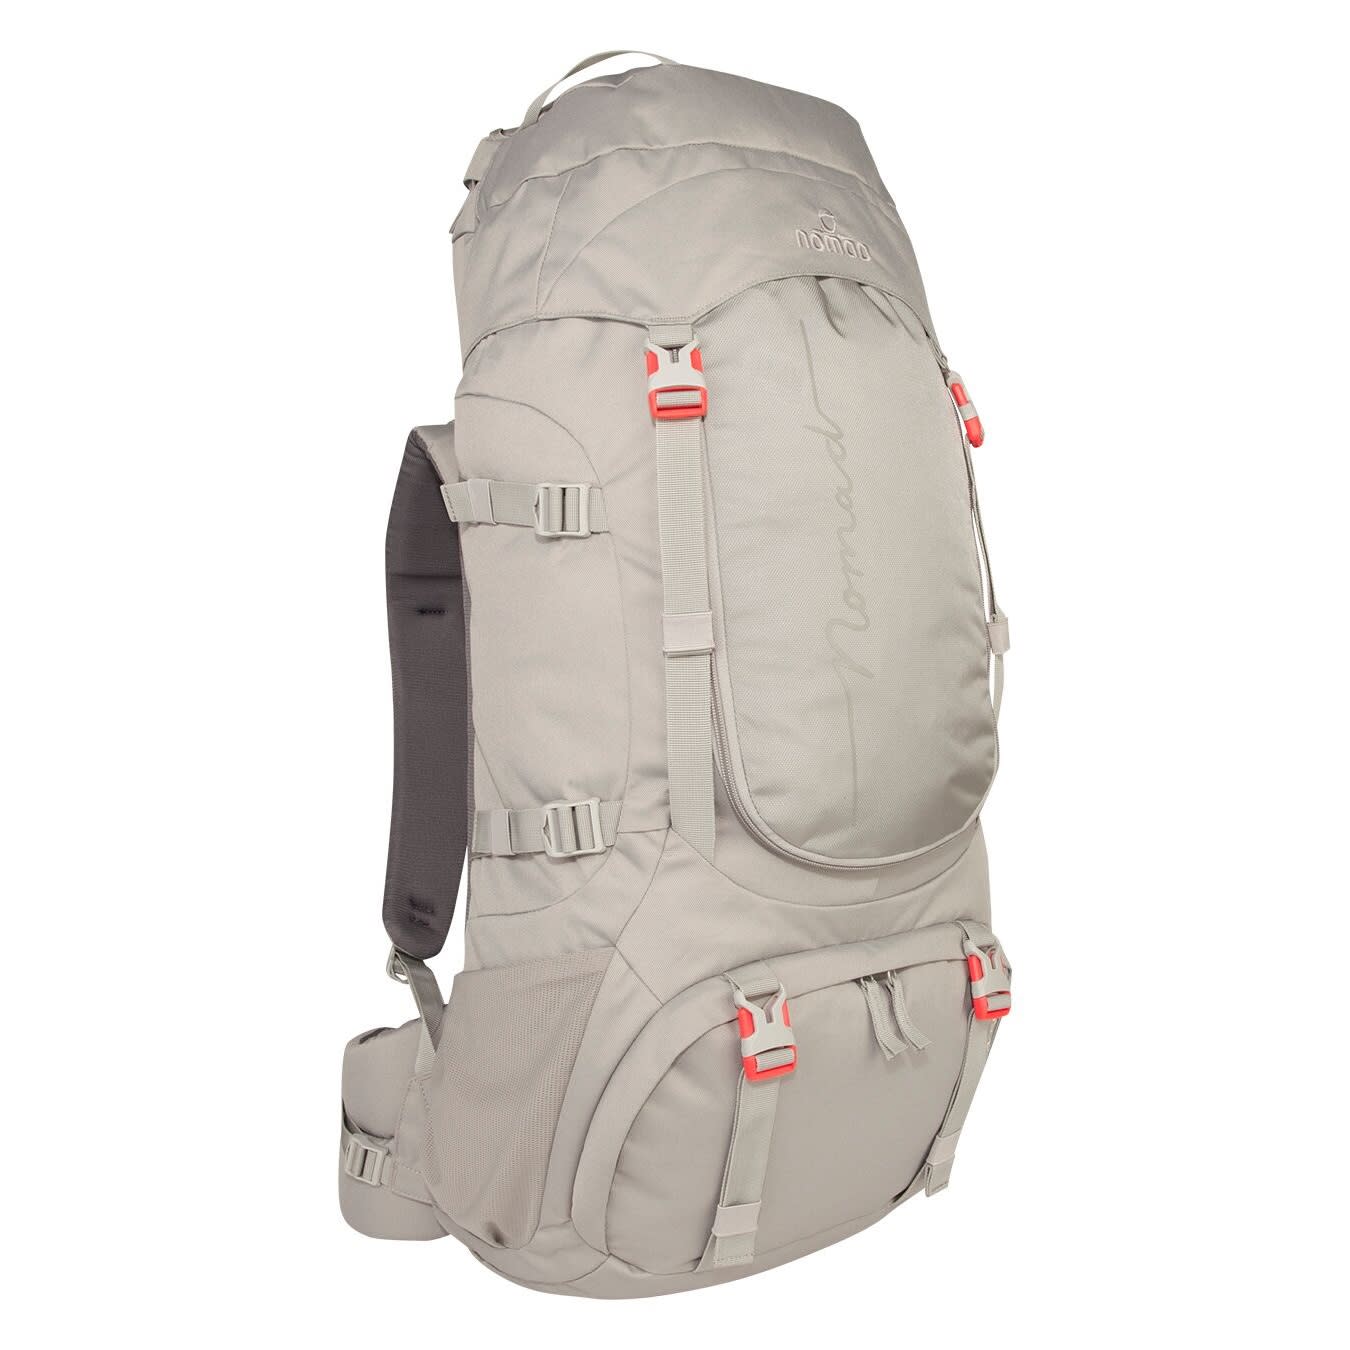 Luchtpost grootmoeder Pamflet Buy Nomad Batura Backpack 55 from Outnorth